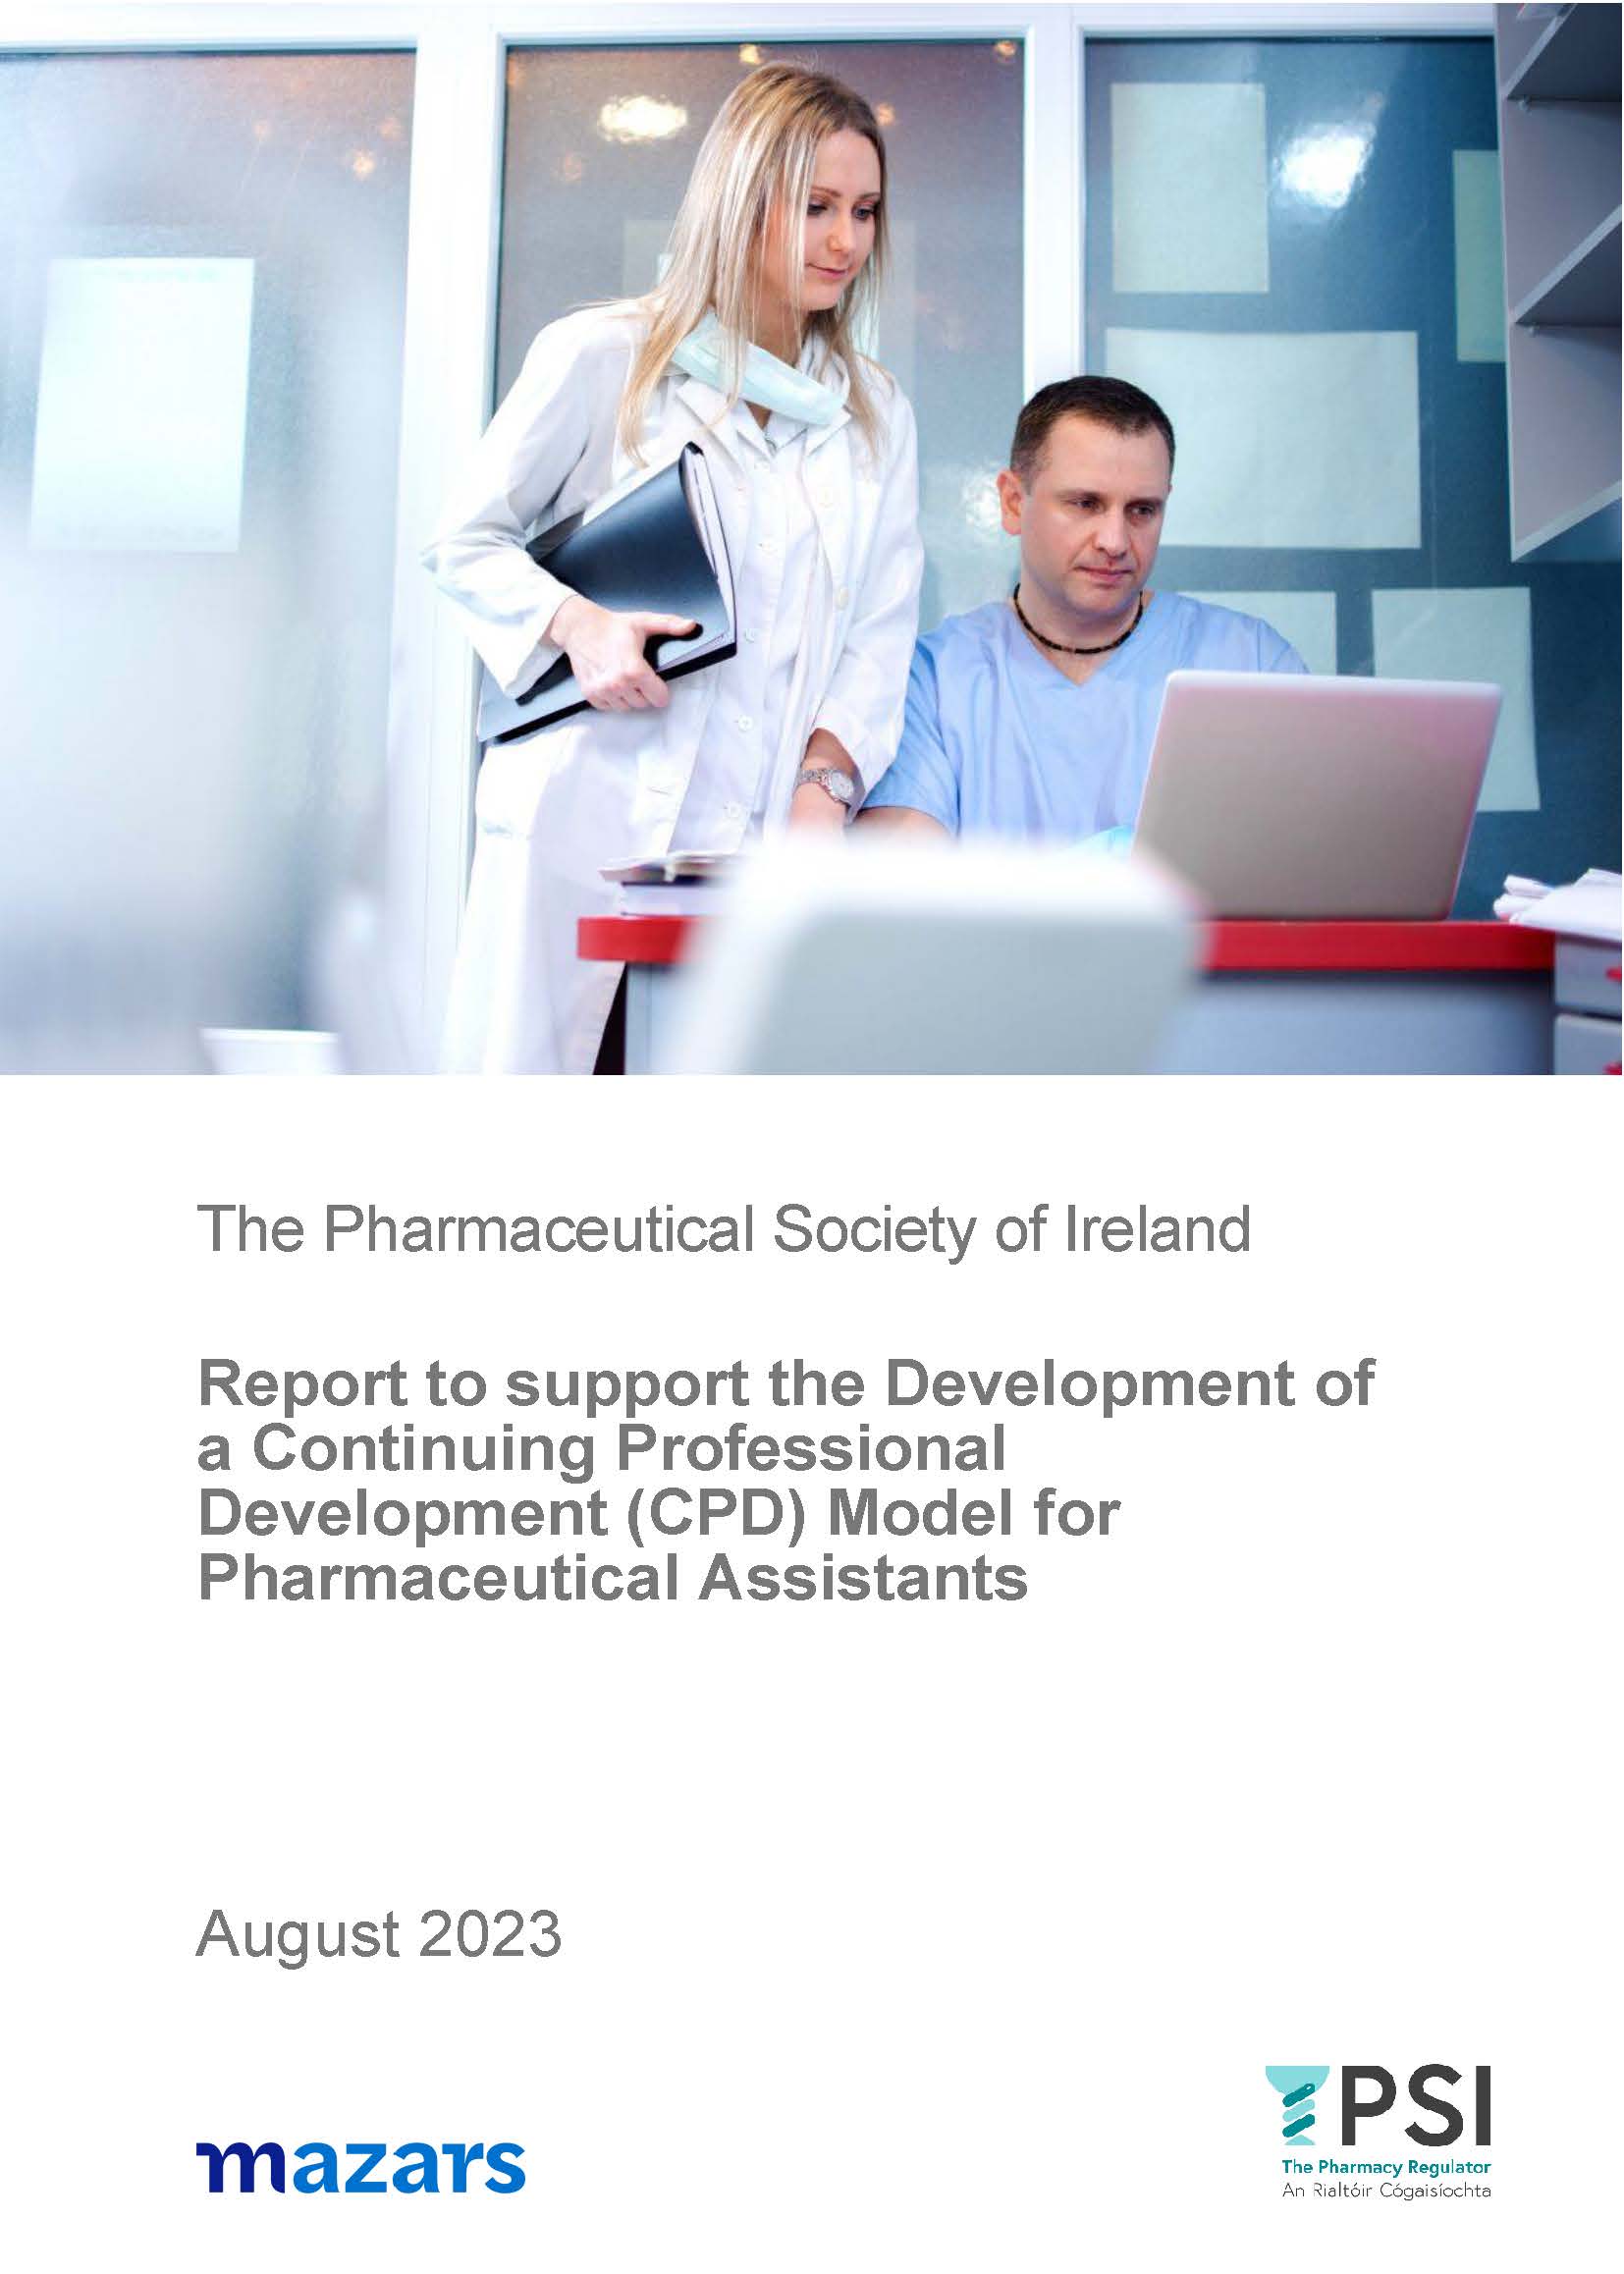 Report to support the development of a CPD Model for Pharmaceutical Assistants